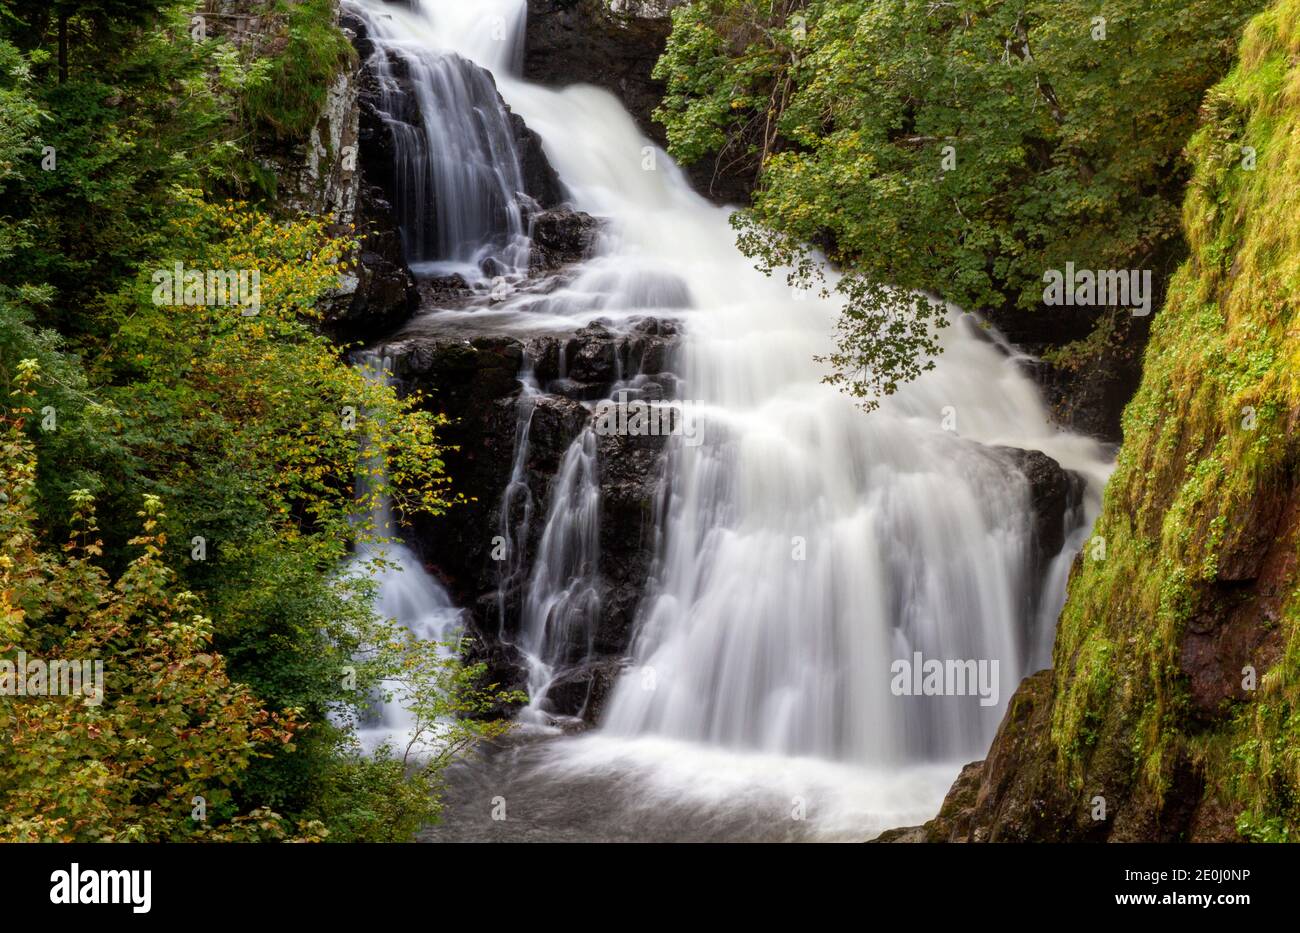 Autumn view of the misty Linn Falls at the famous Angus Glens of Glen Isla. Reekie Linn is of Scotland’s most spectacular waterfalls that cascades through a deep tree-lined canyon with beautiful autumnal and colourful scenery west of the Angus County in Scotland, UK Stock Photo